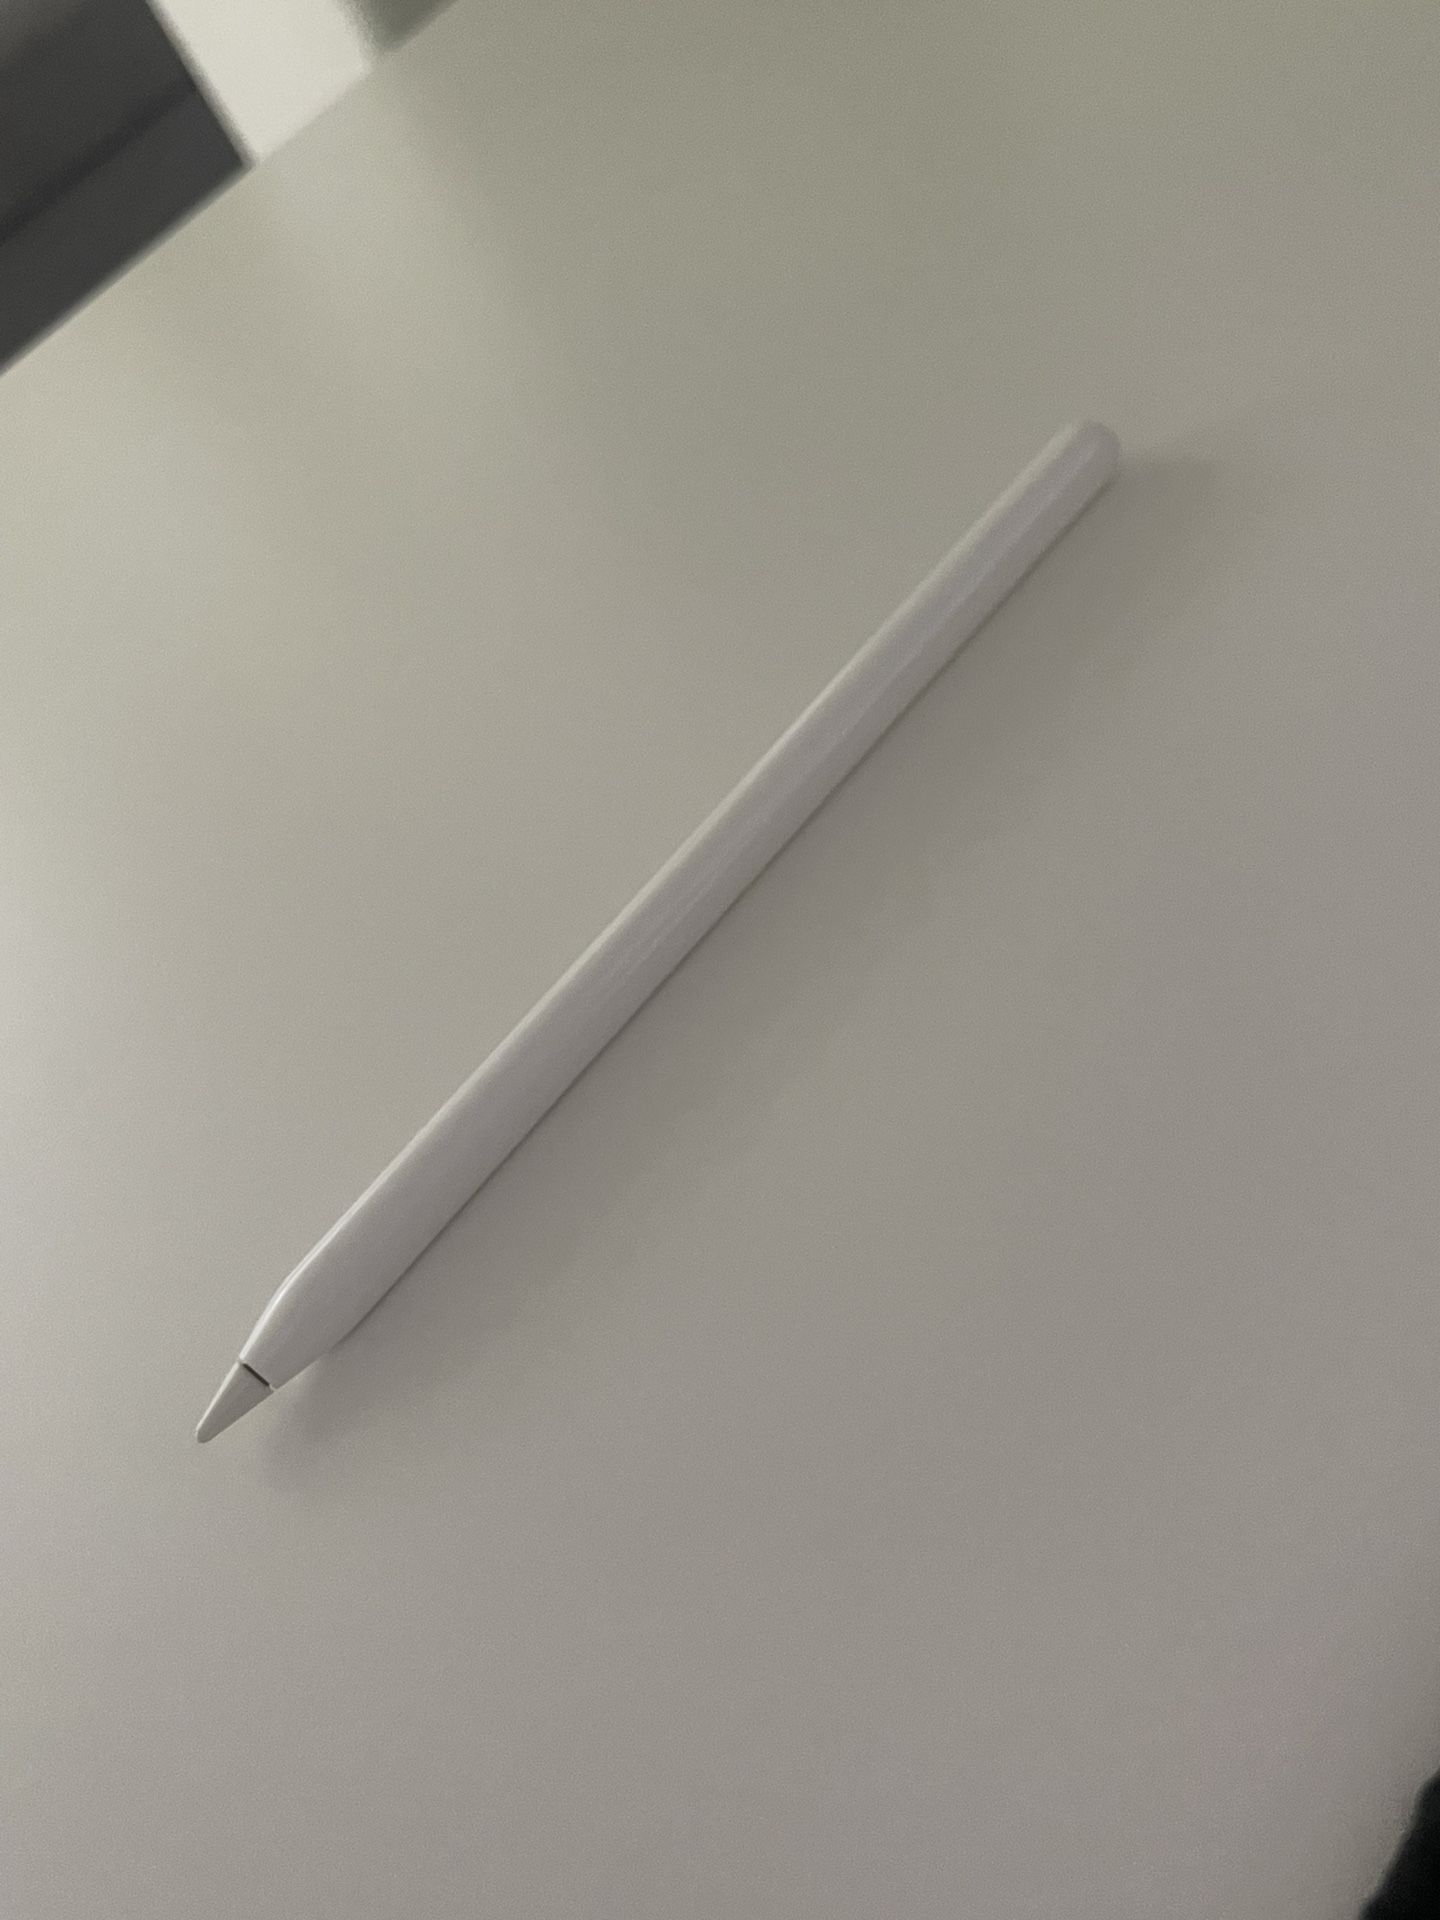 Apple Pencil 2 For iPad Air 4the Gen And Up/ For iPad Pro 11-inch And 12.9-inch Like New !